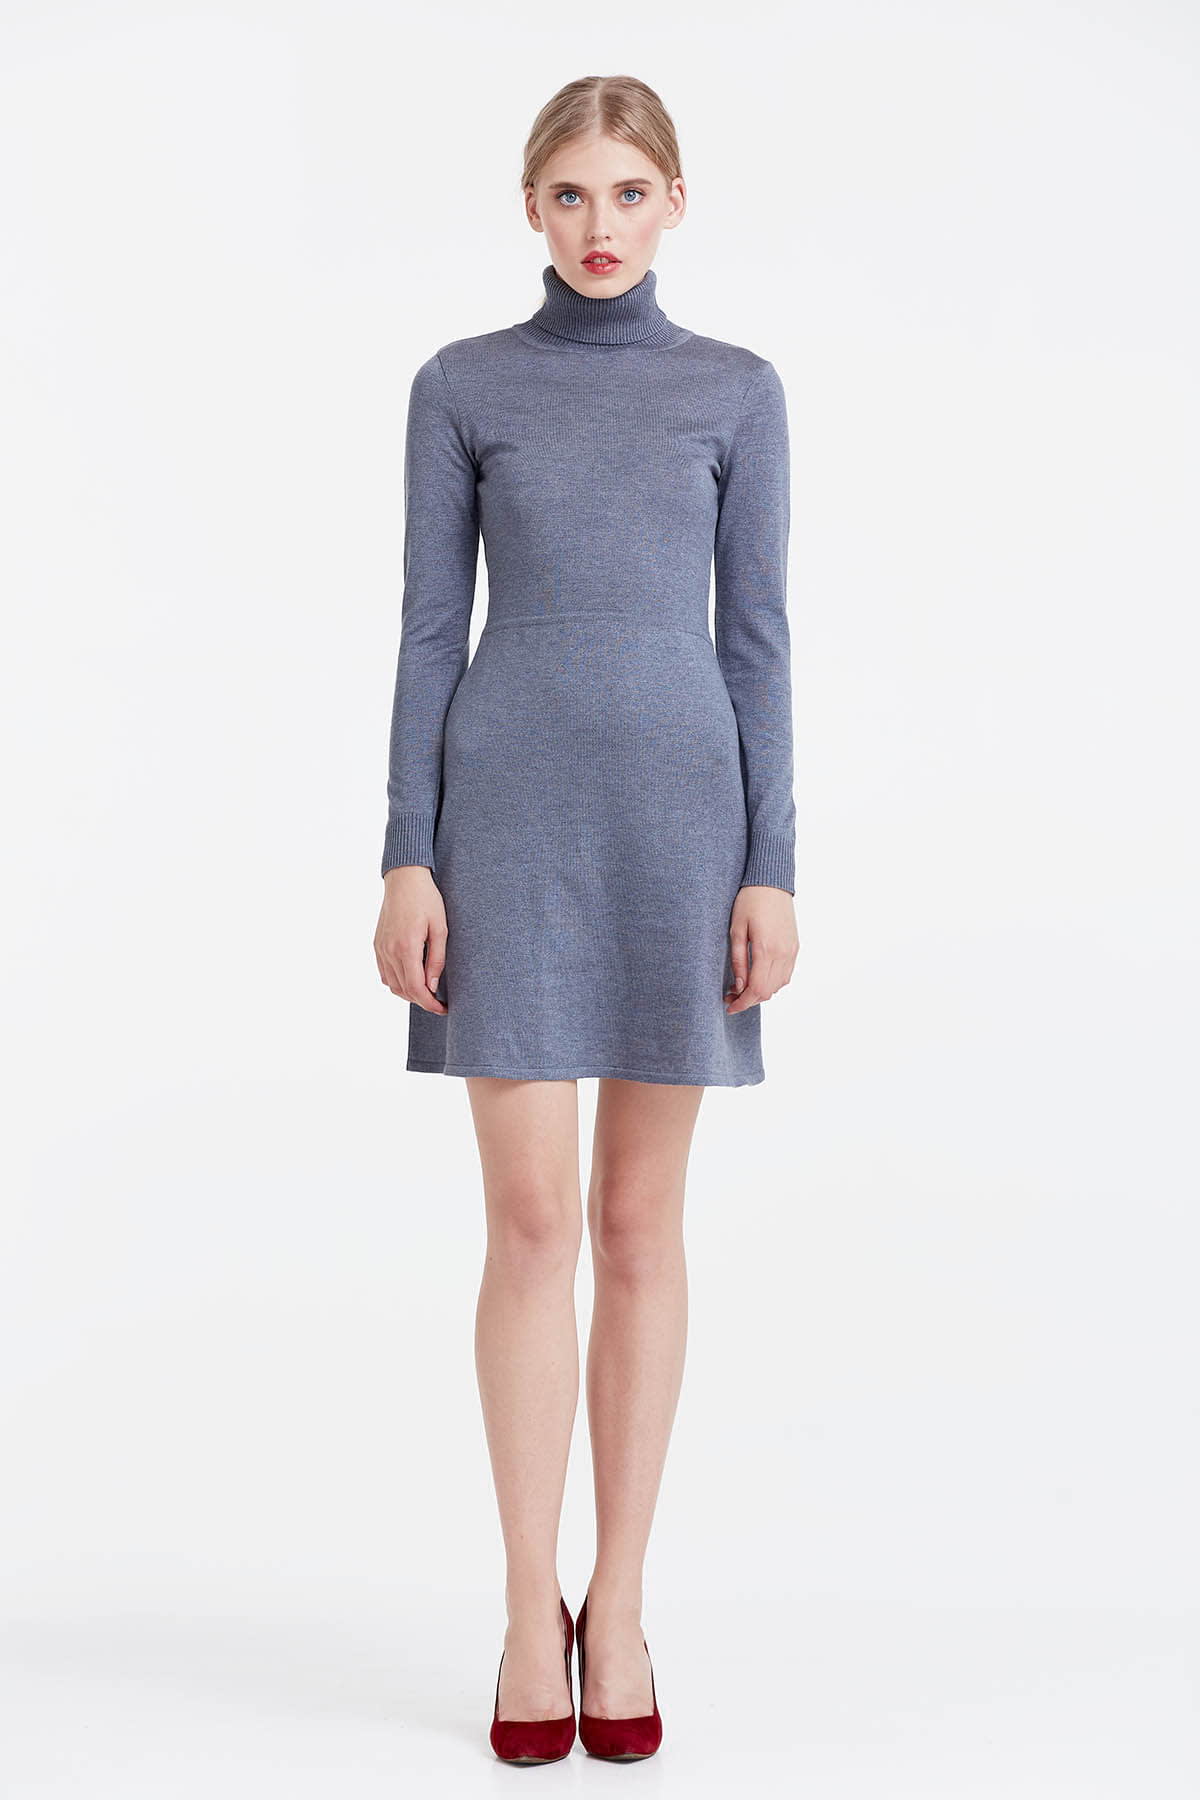 Grey knitted dress , photo 2